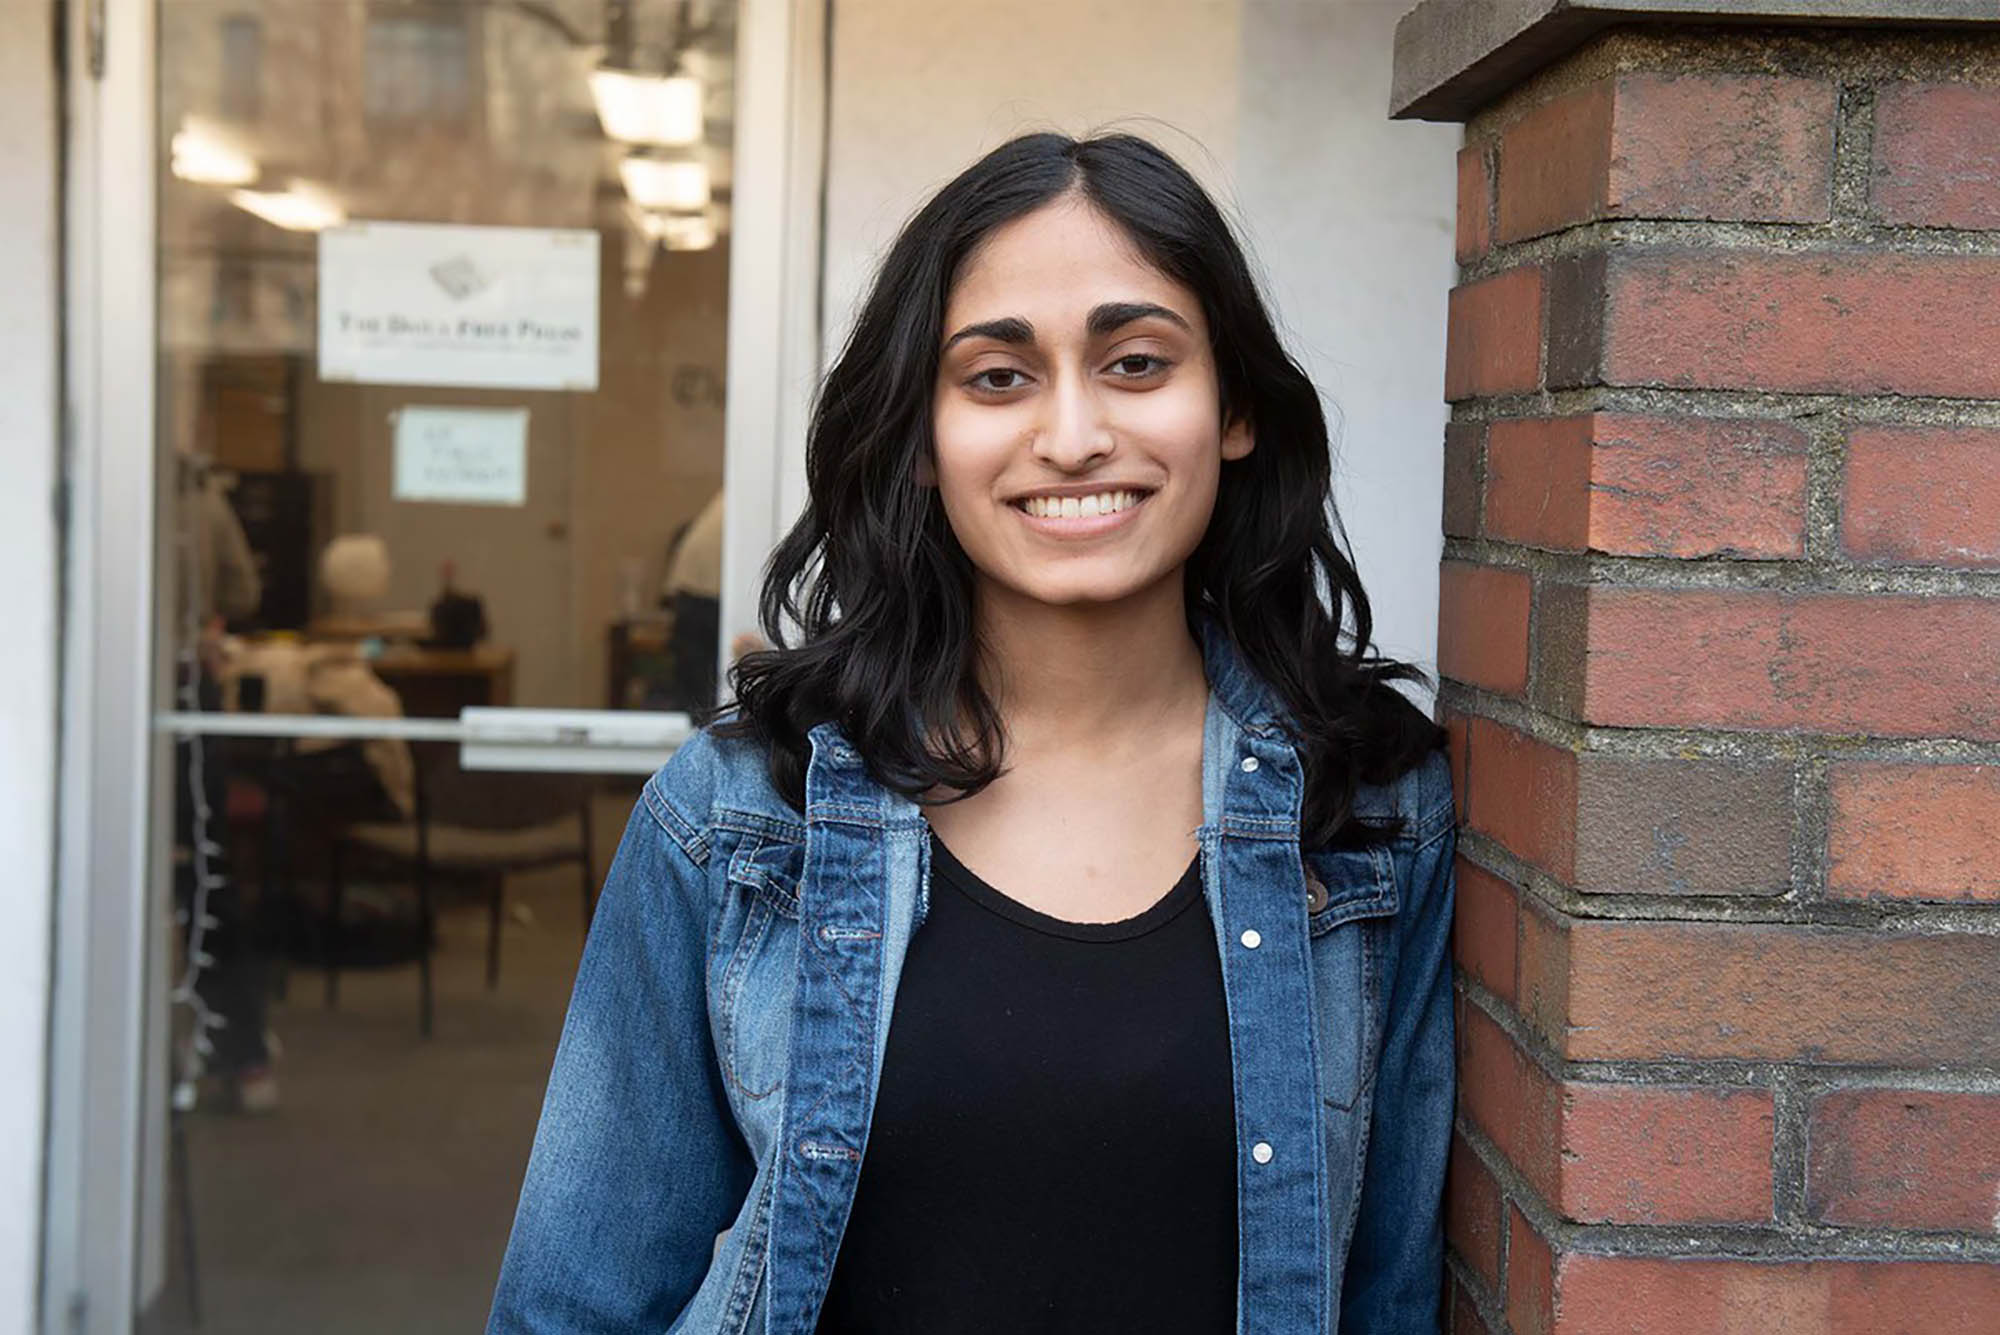 Photo: Madhri Yehiya, a young South Asian woman with curled black hair and wearing a black shirt and jean jacket smiles and poses outside a clear door of a brick building.